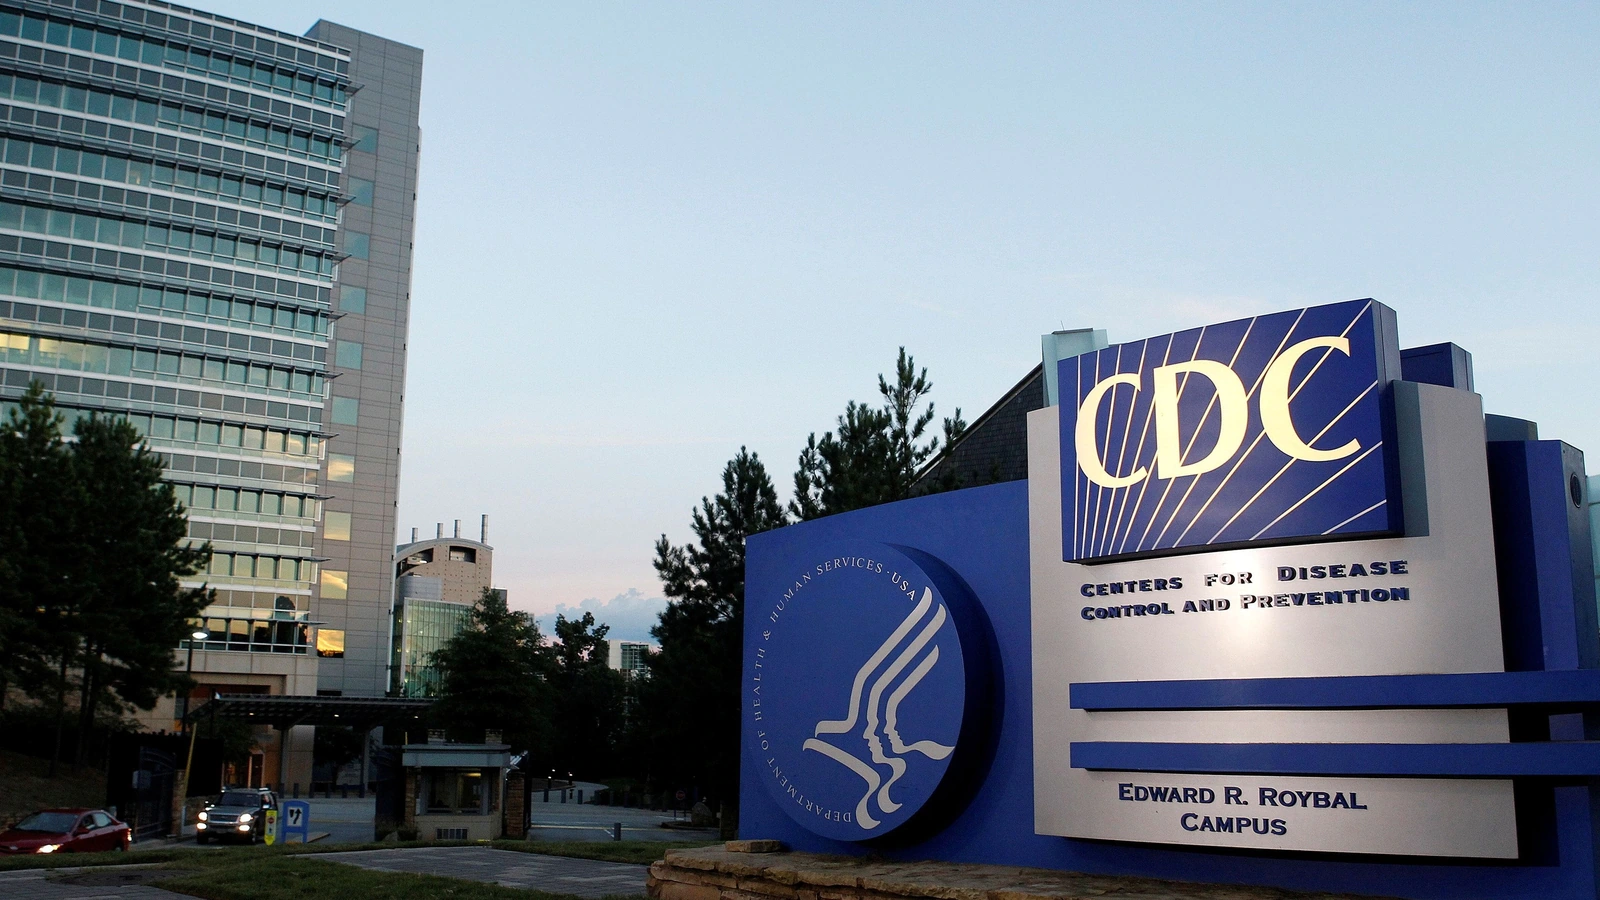 CDC Announced Latest Updated CDC Covid Guidelines  |COVID-19|